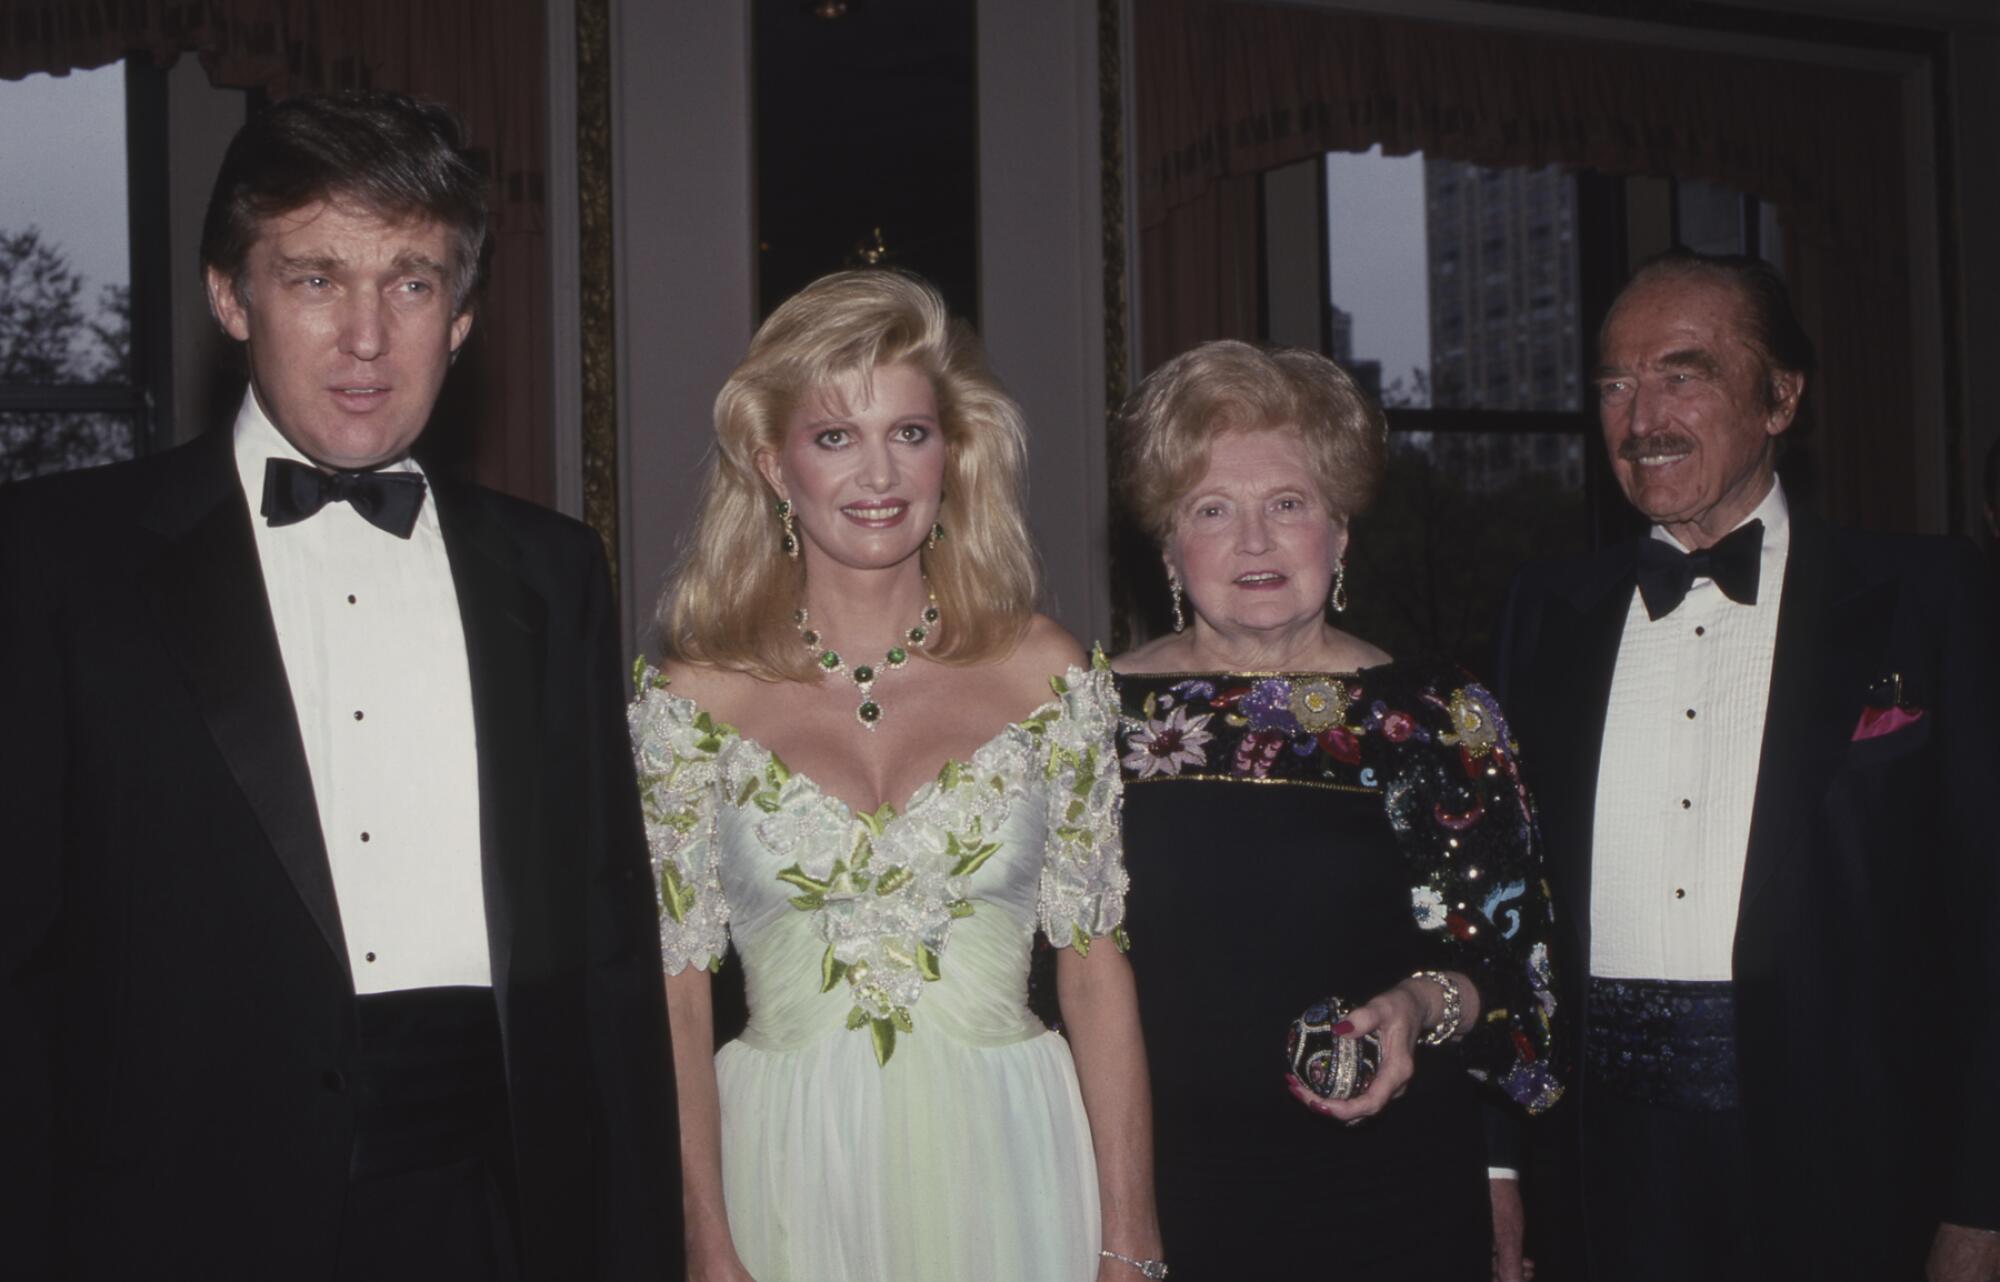 Two women, one in a cream evening dress and the other in a black one, are flanked by men in dark suits and bow ties.